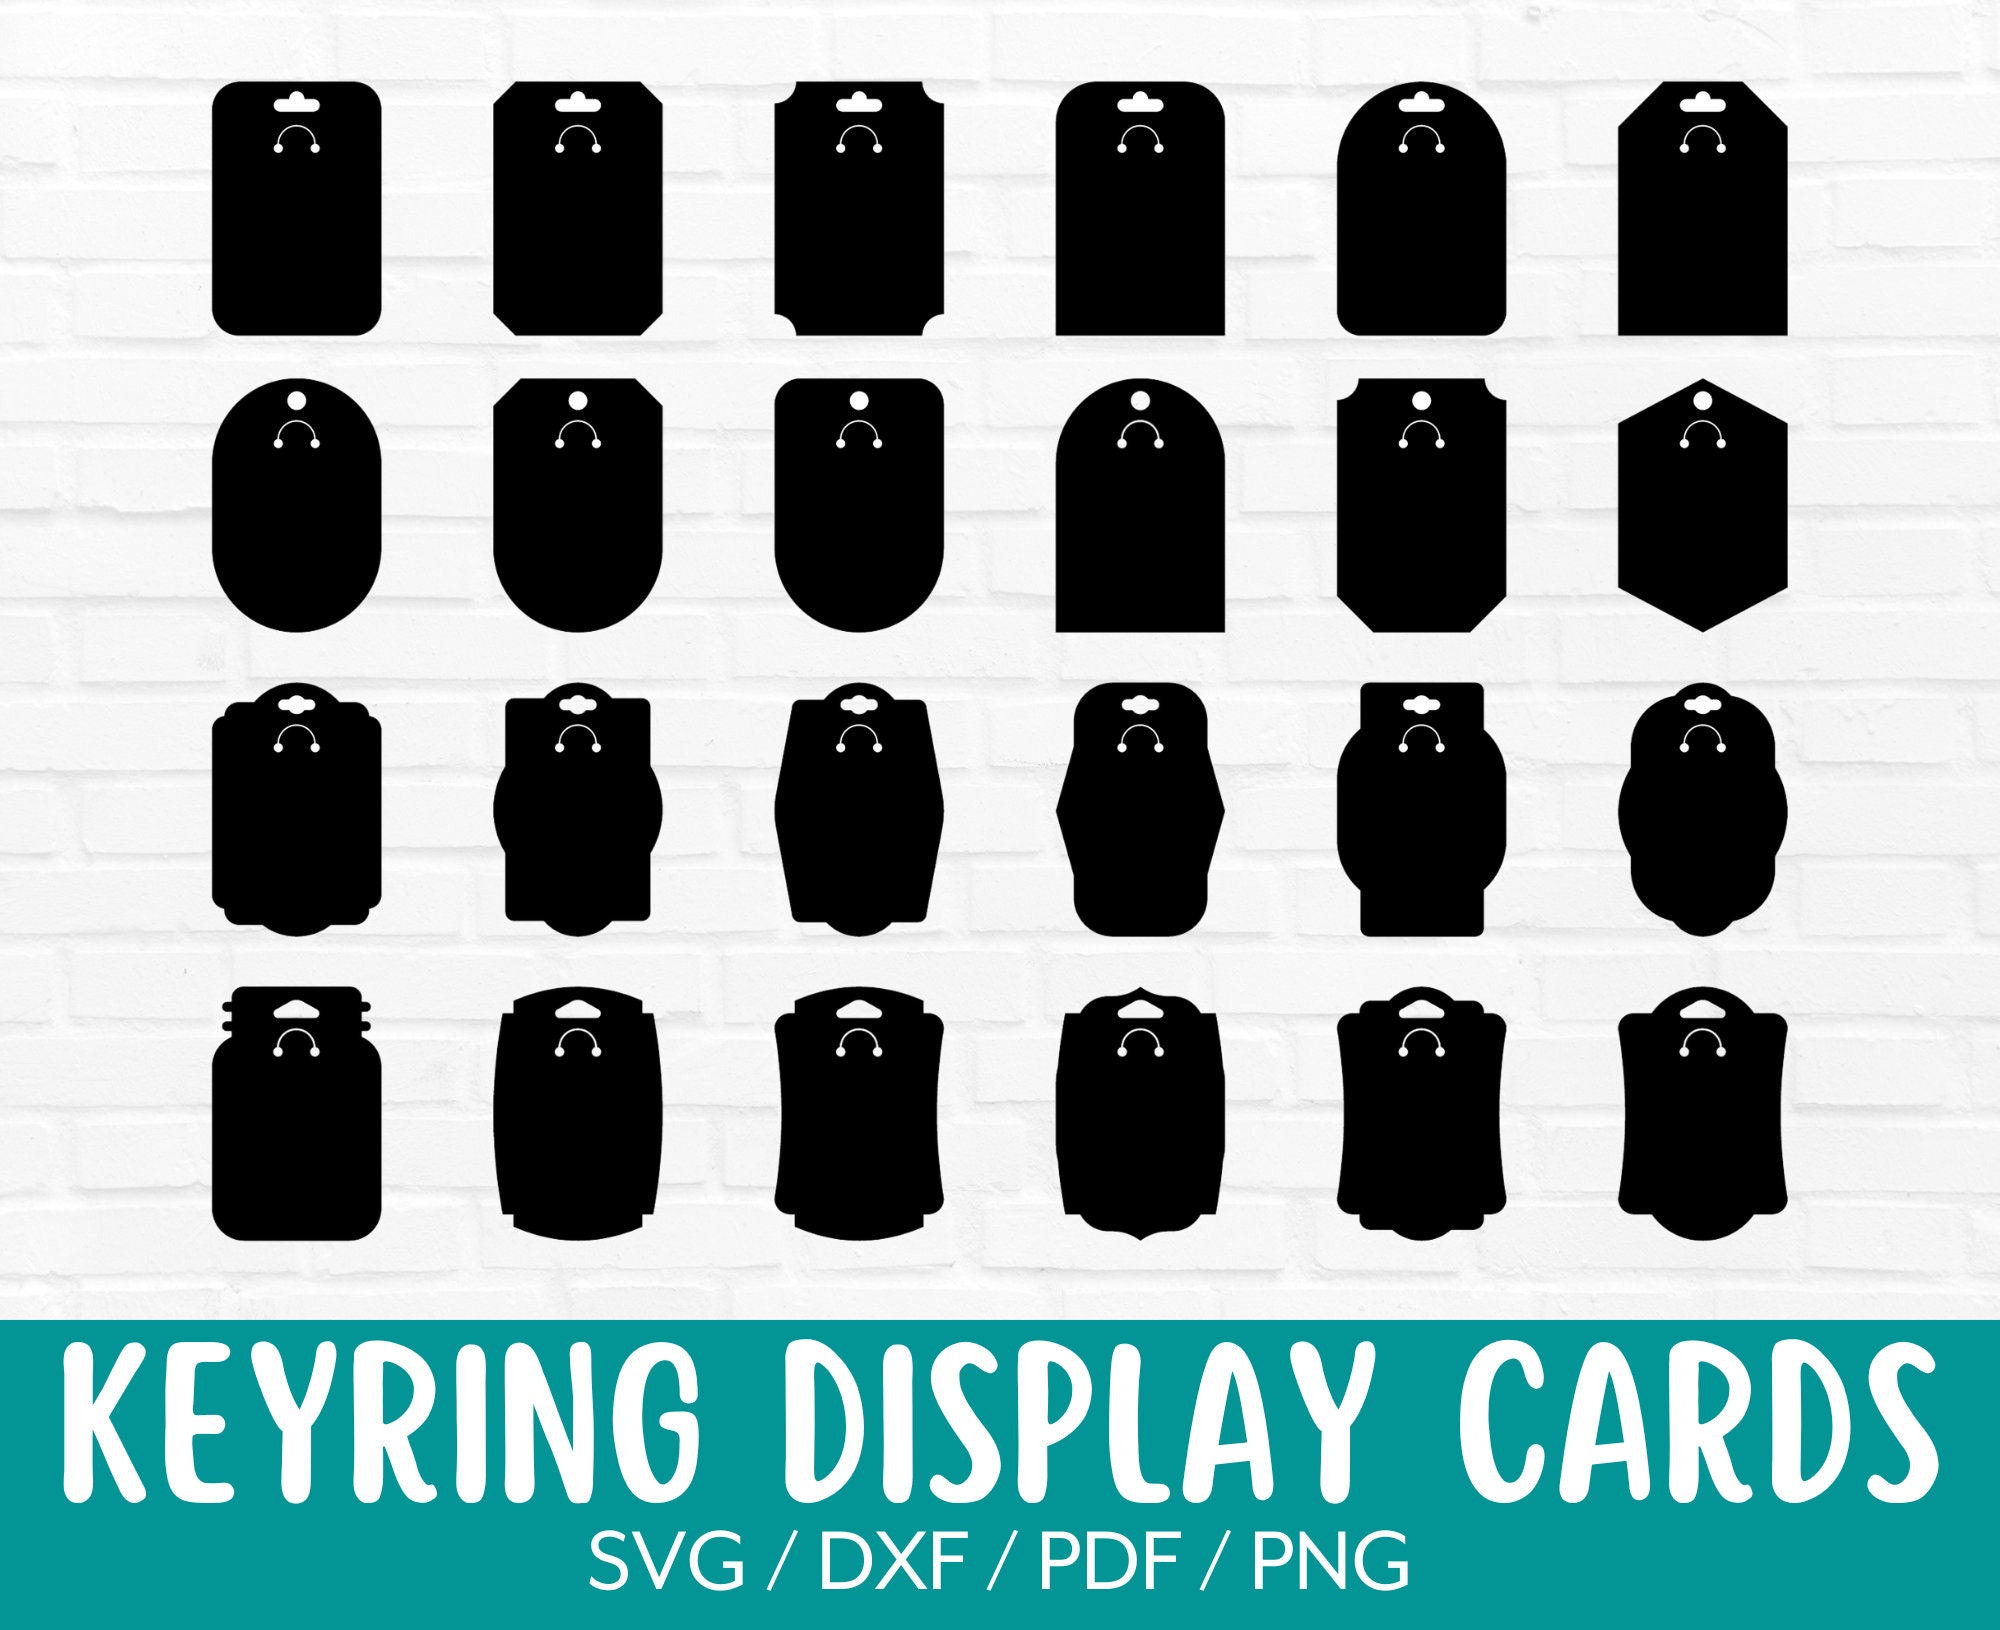 Keyring Display Card 3 x 4.79 Template, Keychain Display, Keyring Card  SVG | Cricut Silhouette, Silhouette Studio, SVG, Psd, PNG, Eps, Dxf